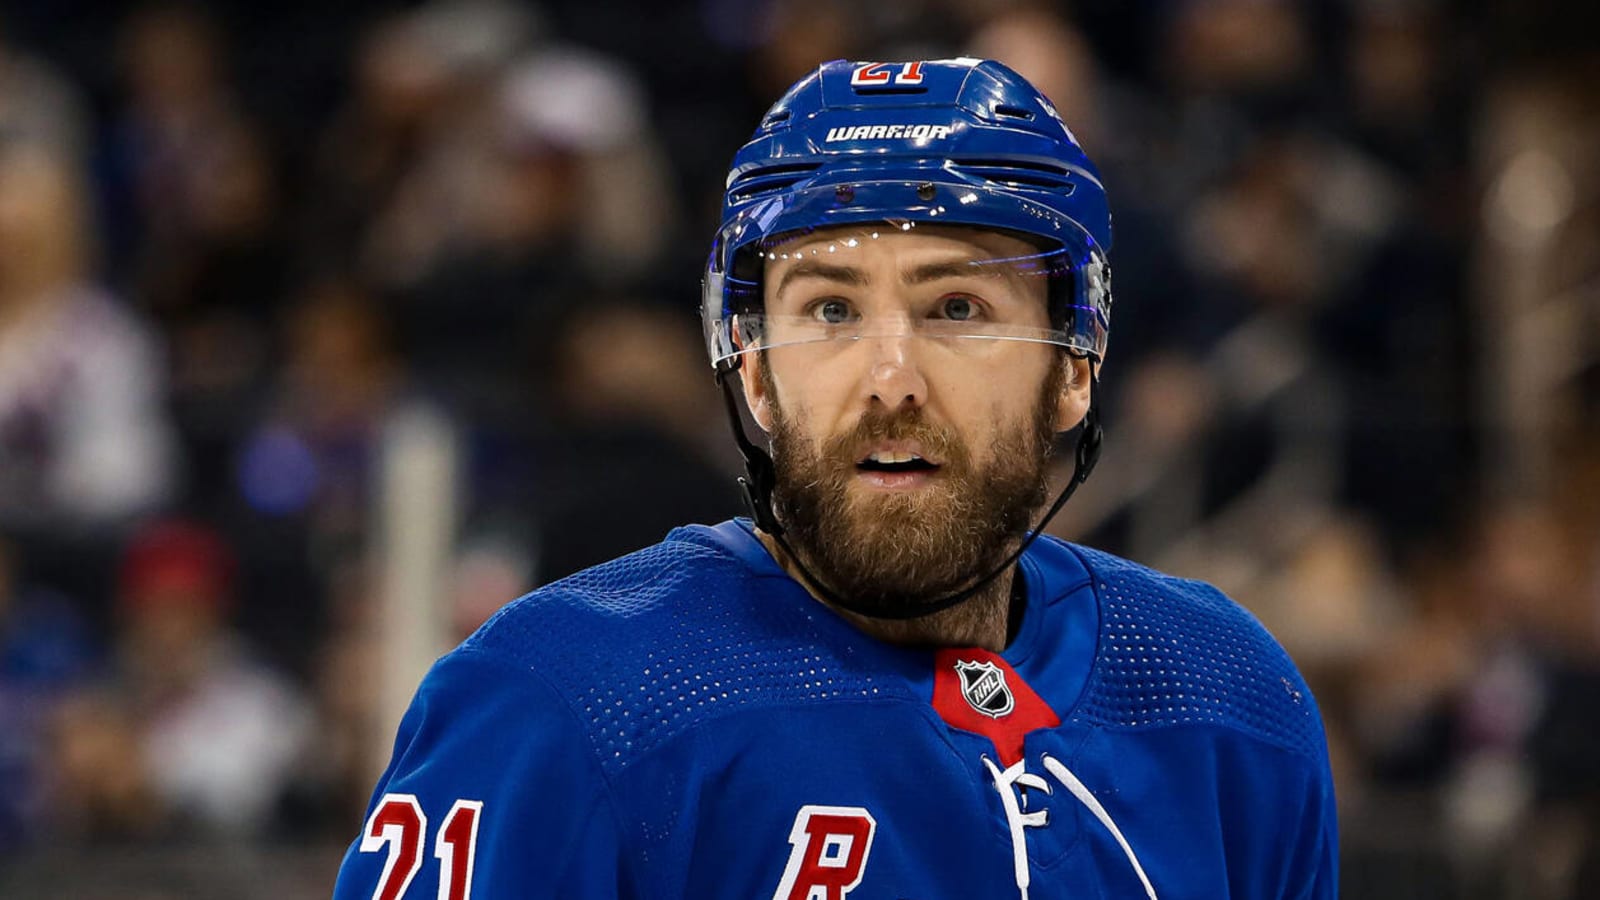 Rangers’ Goodrow leaves game after taking puck to the face